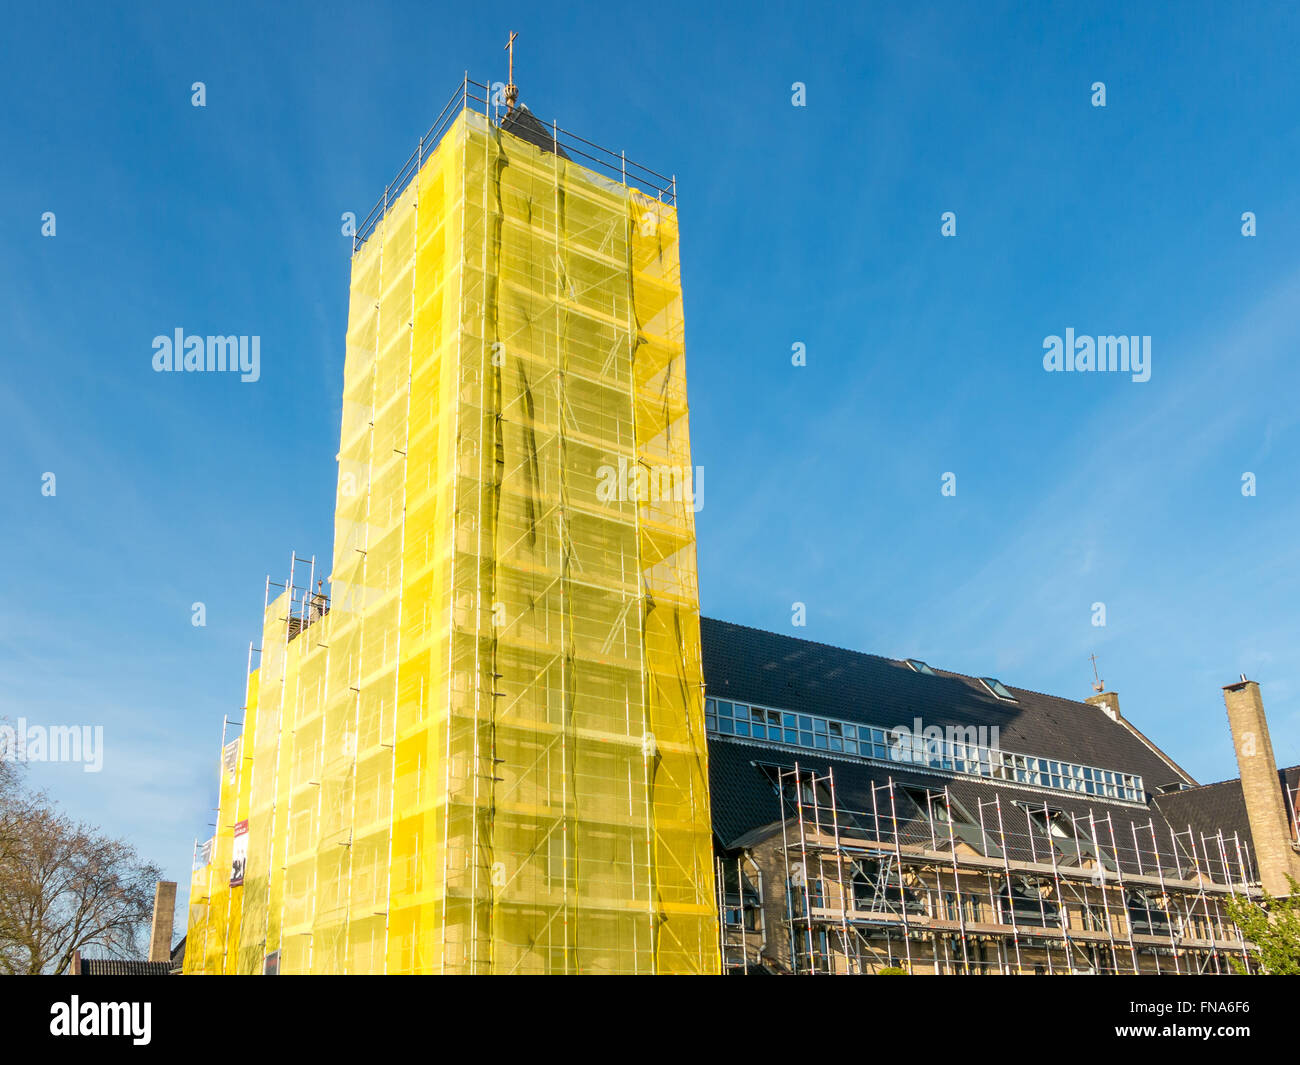 Scaffold construction to renovate church tower building in Hilversum in the Netherlands Stock Photo